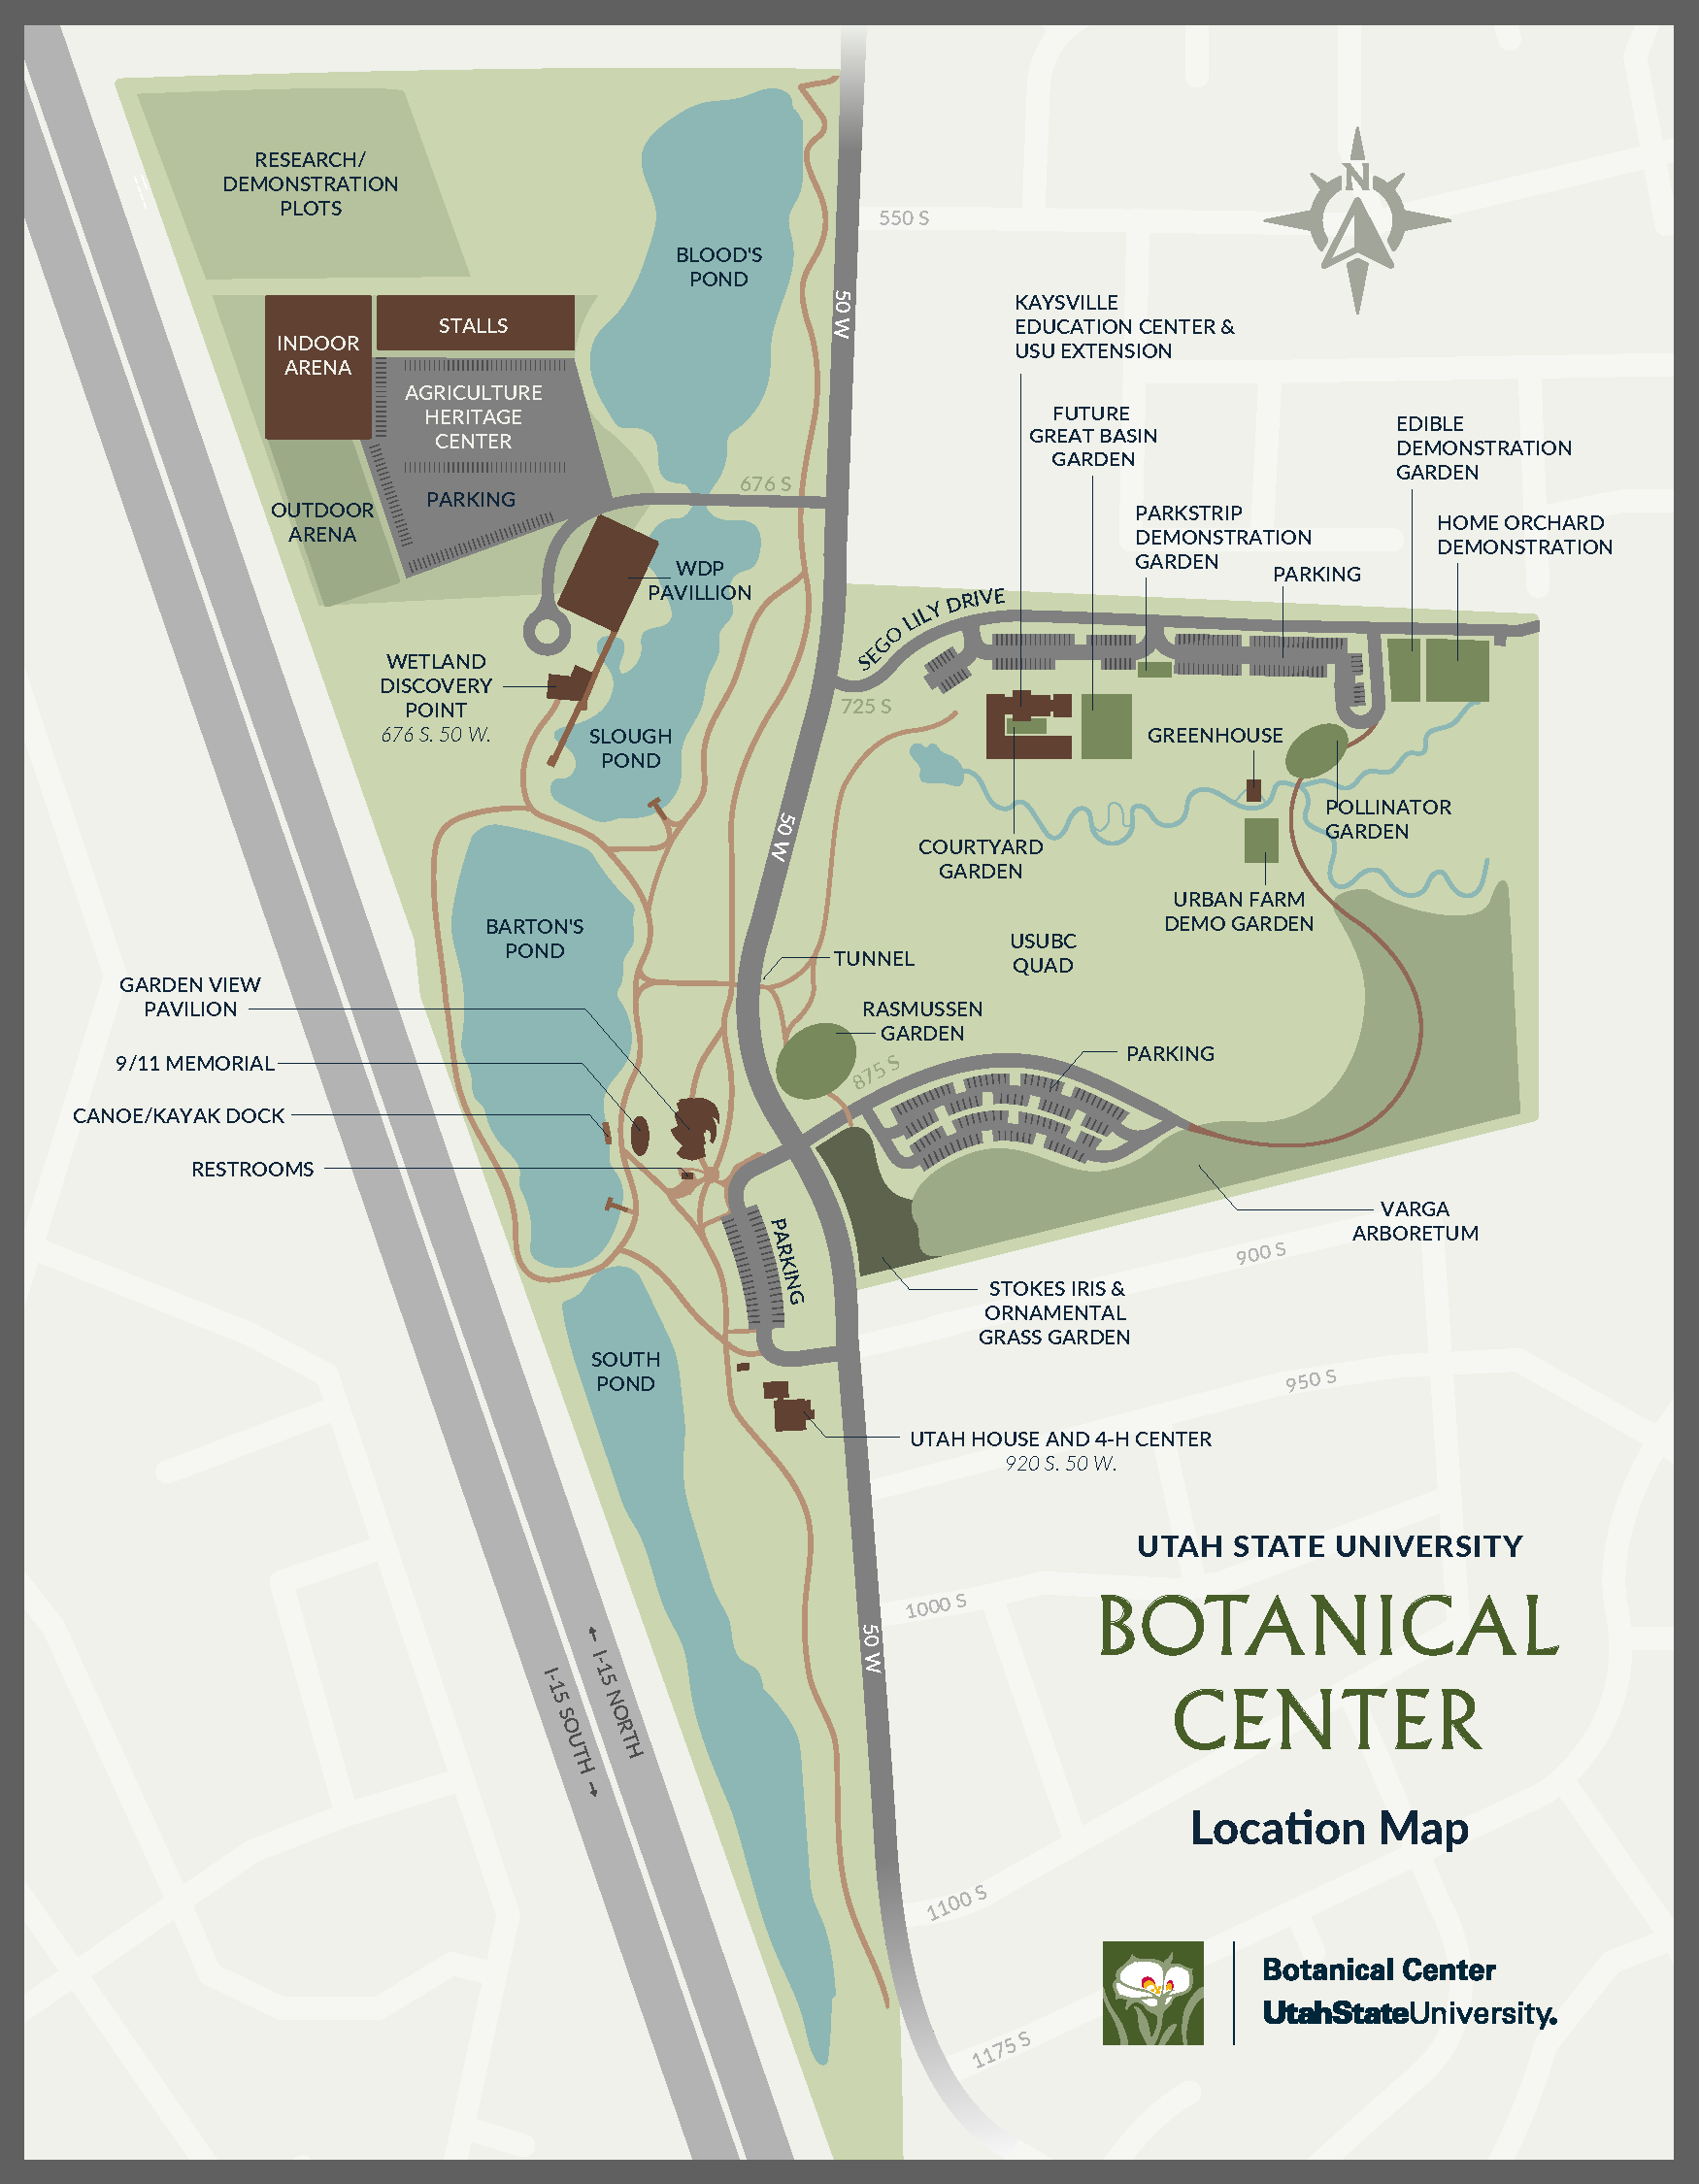 Image of the map of the USU Botanical Center with labels for individual gardens